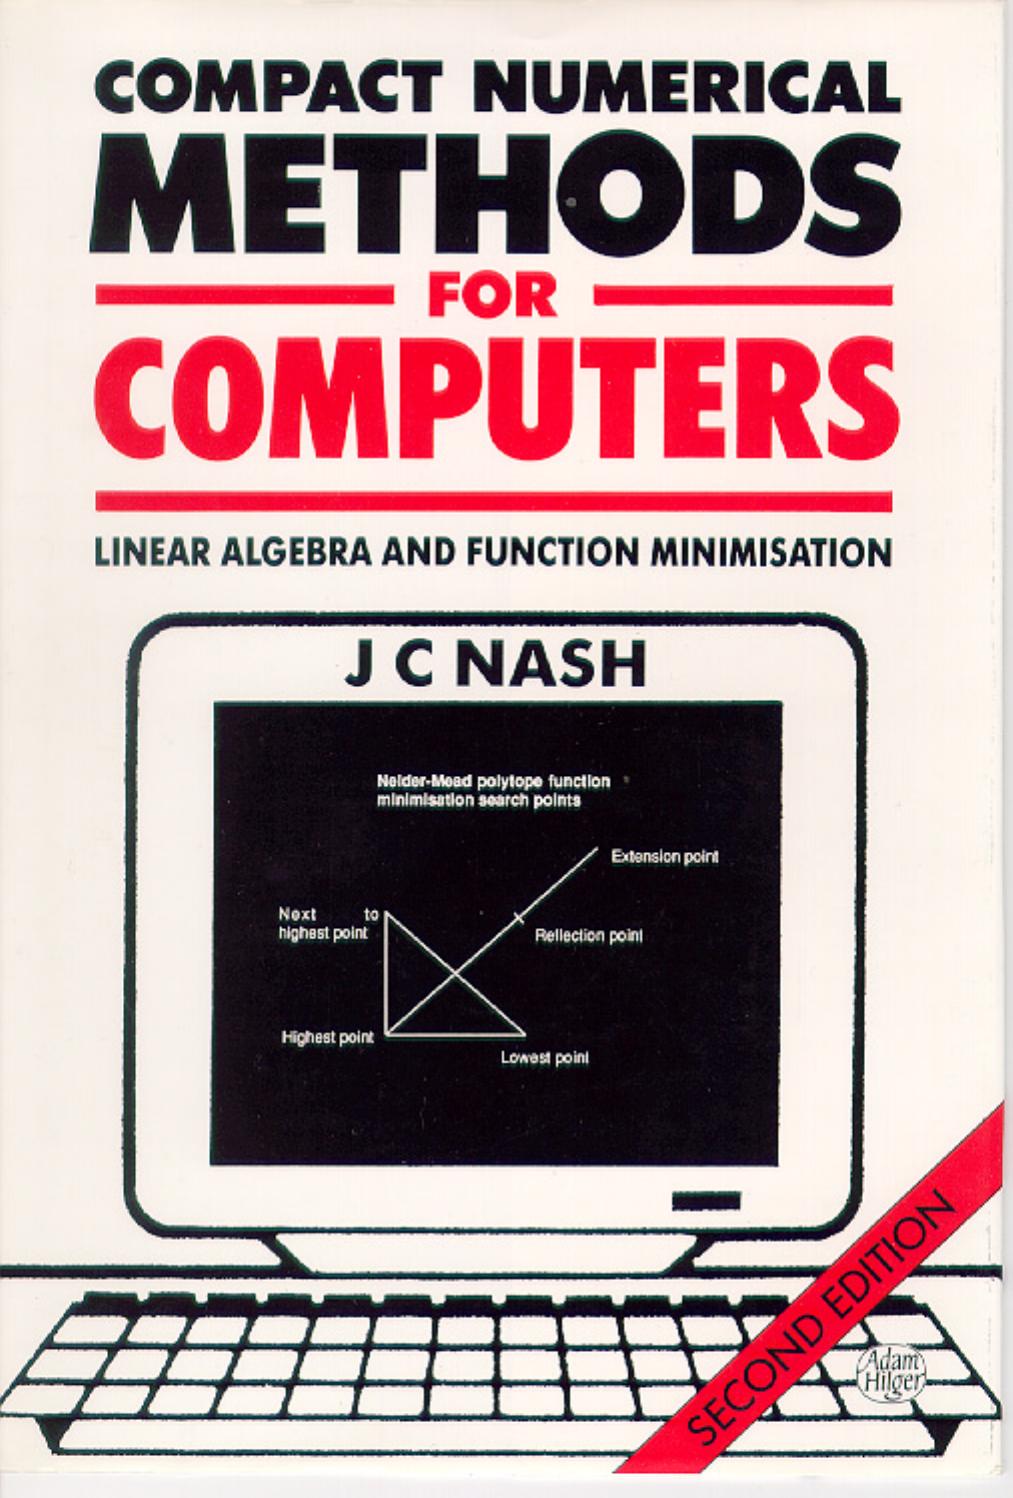 Compact Numerical Methods for Computers Linear Algebra and Function Minimisation 2nd ed 1990.pdf